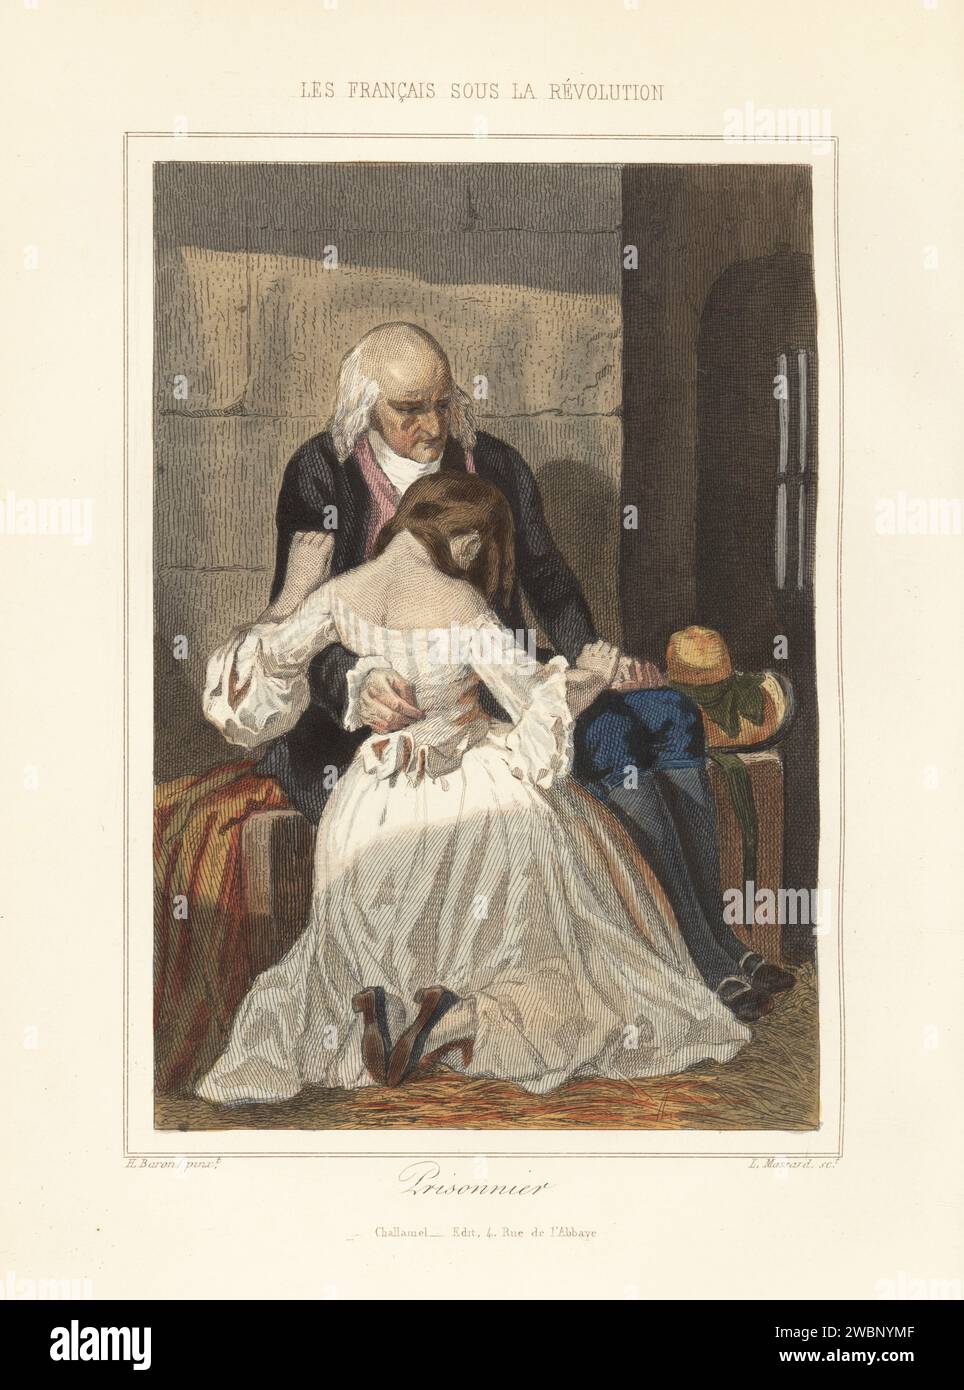 Prisoner with a visitor before his execution. A young girl kneels weeping before an old man seated on a bench in a prison cell. Prisonnier. Handcoloured steel engraving by Leopold Massard after an illustration by Henri Baron from Augustin Challamel and Wilhelm Tenint’s Les Francais sous la Revolution, The French under the Revolution, Challamel, Paris, 1843. Stock Photo